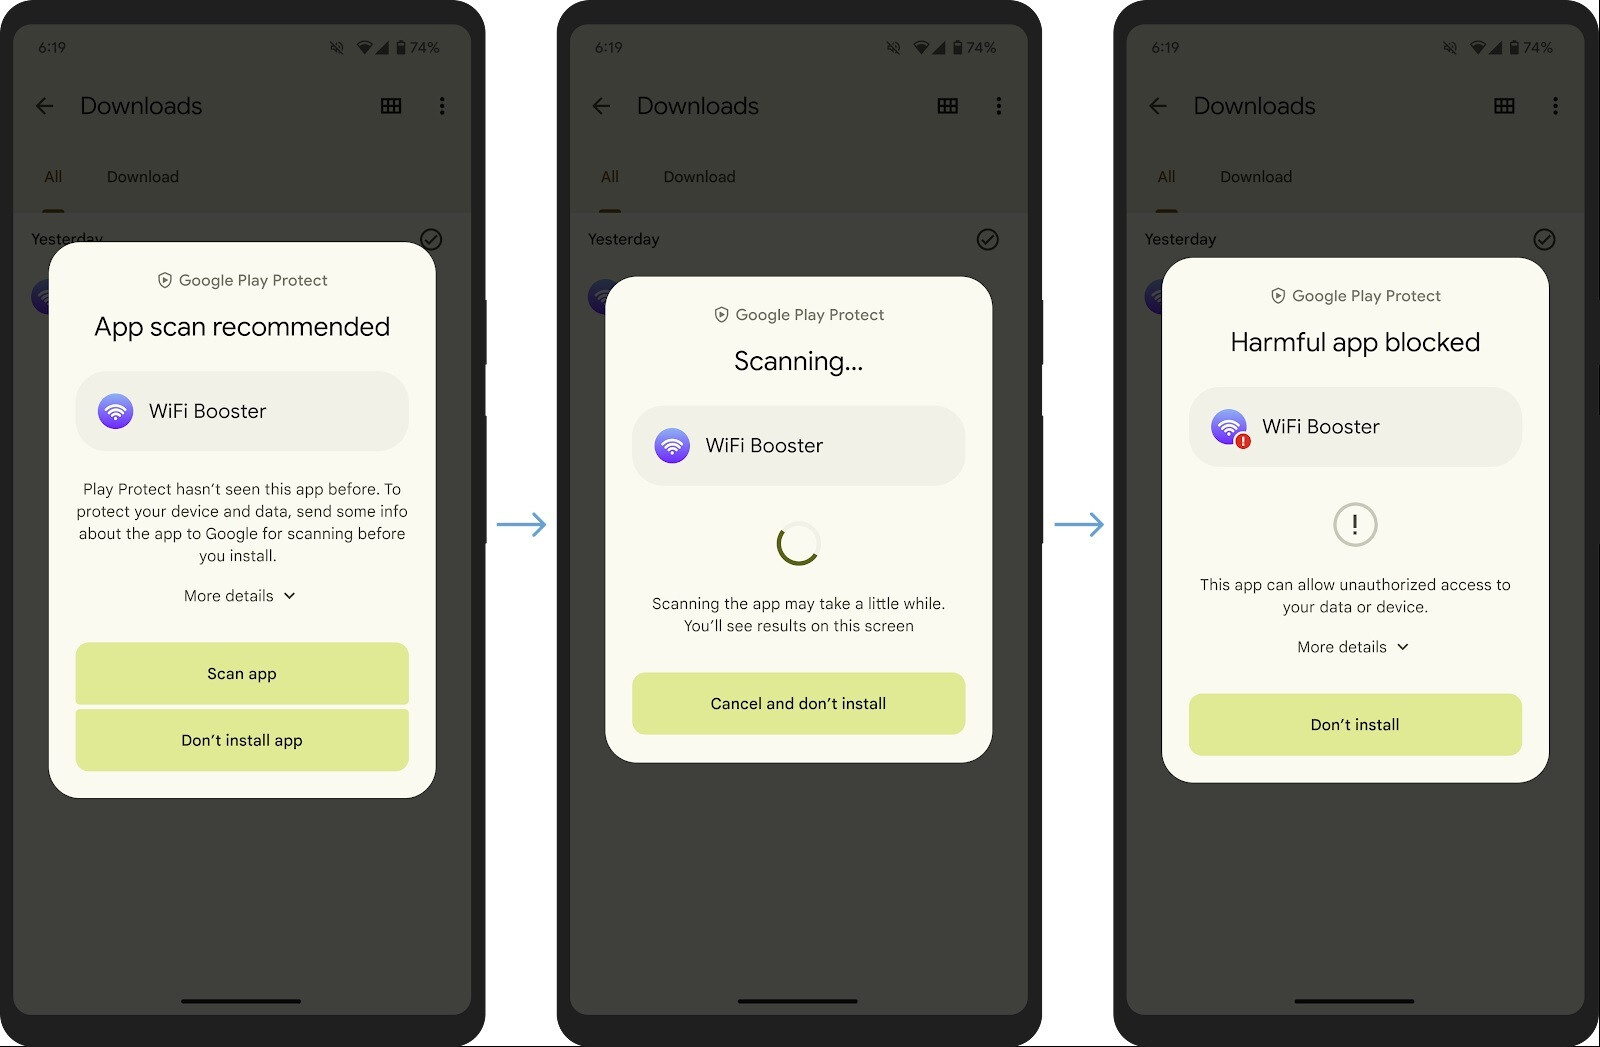 Google Play Protect will perform real-time app scanning at the code level to help detect dangerous apps disguised to evade detection.  Google Play Protect can now detect malicious Android apps that try to evade detection.